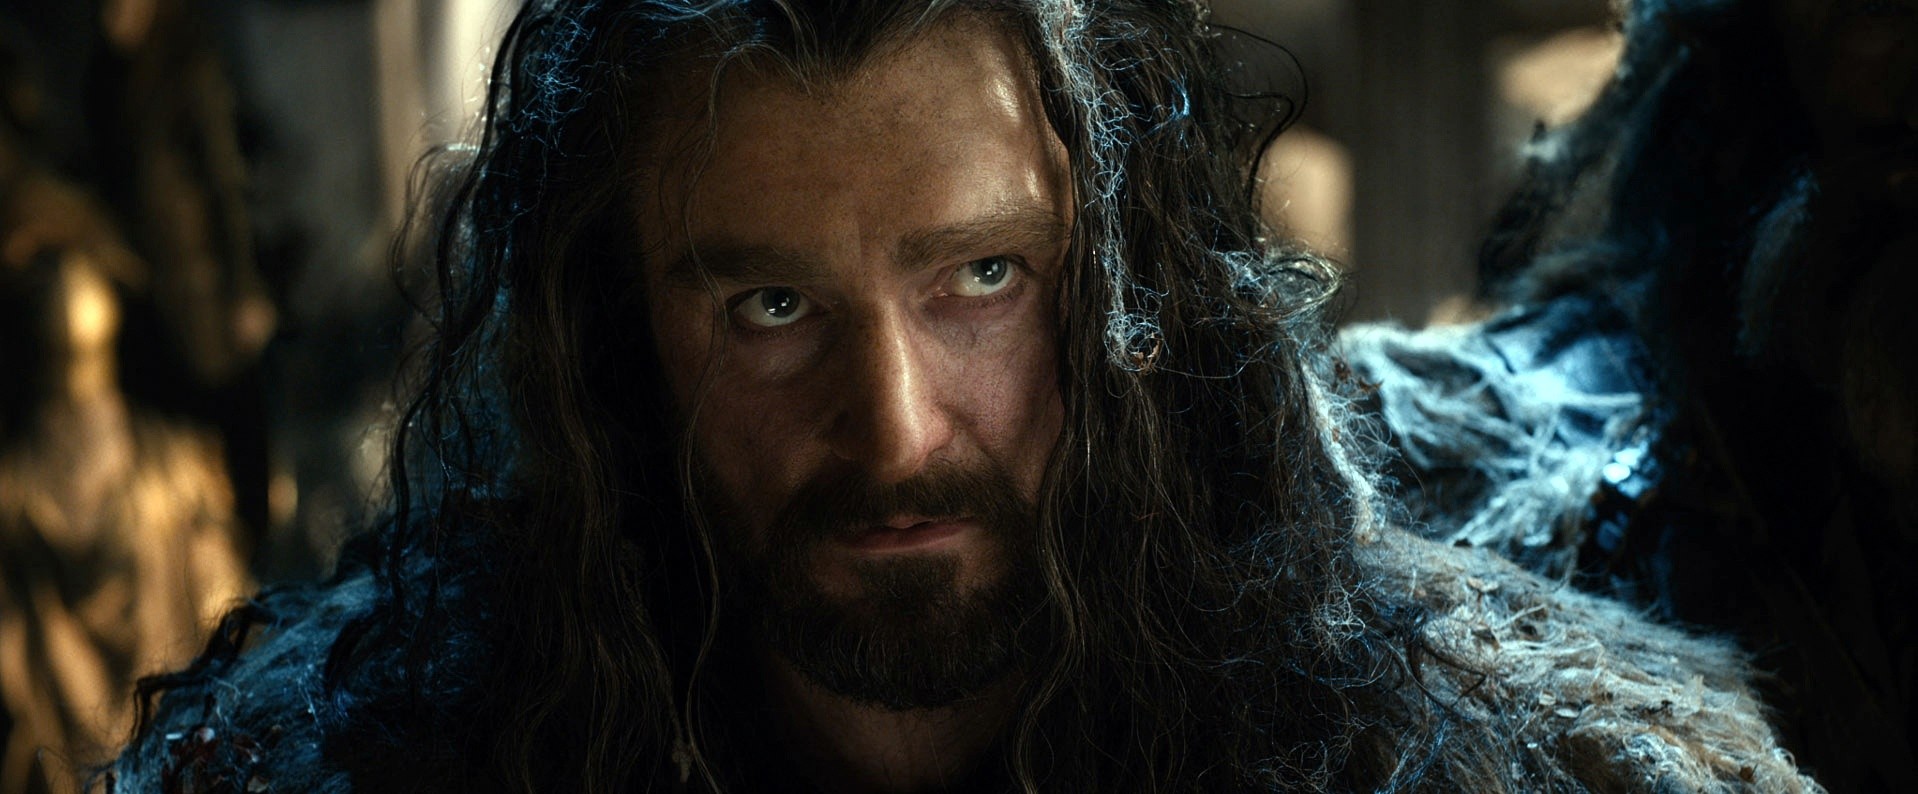 Richard Armitage stars as Thorin Oakenshield in Warner Bros. Pictures' The Hobbit: The Desolation of Smaug (2013)